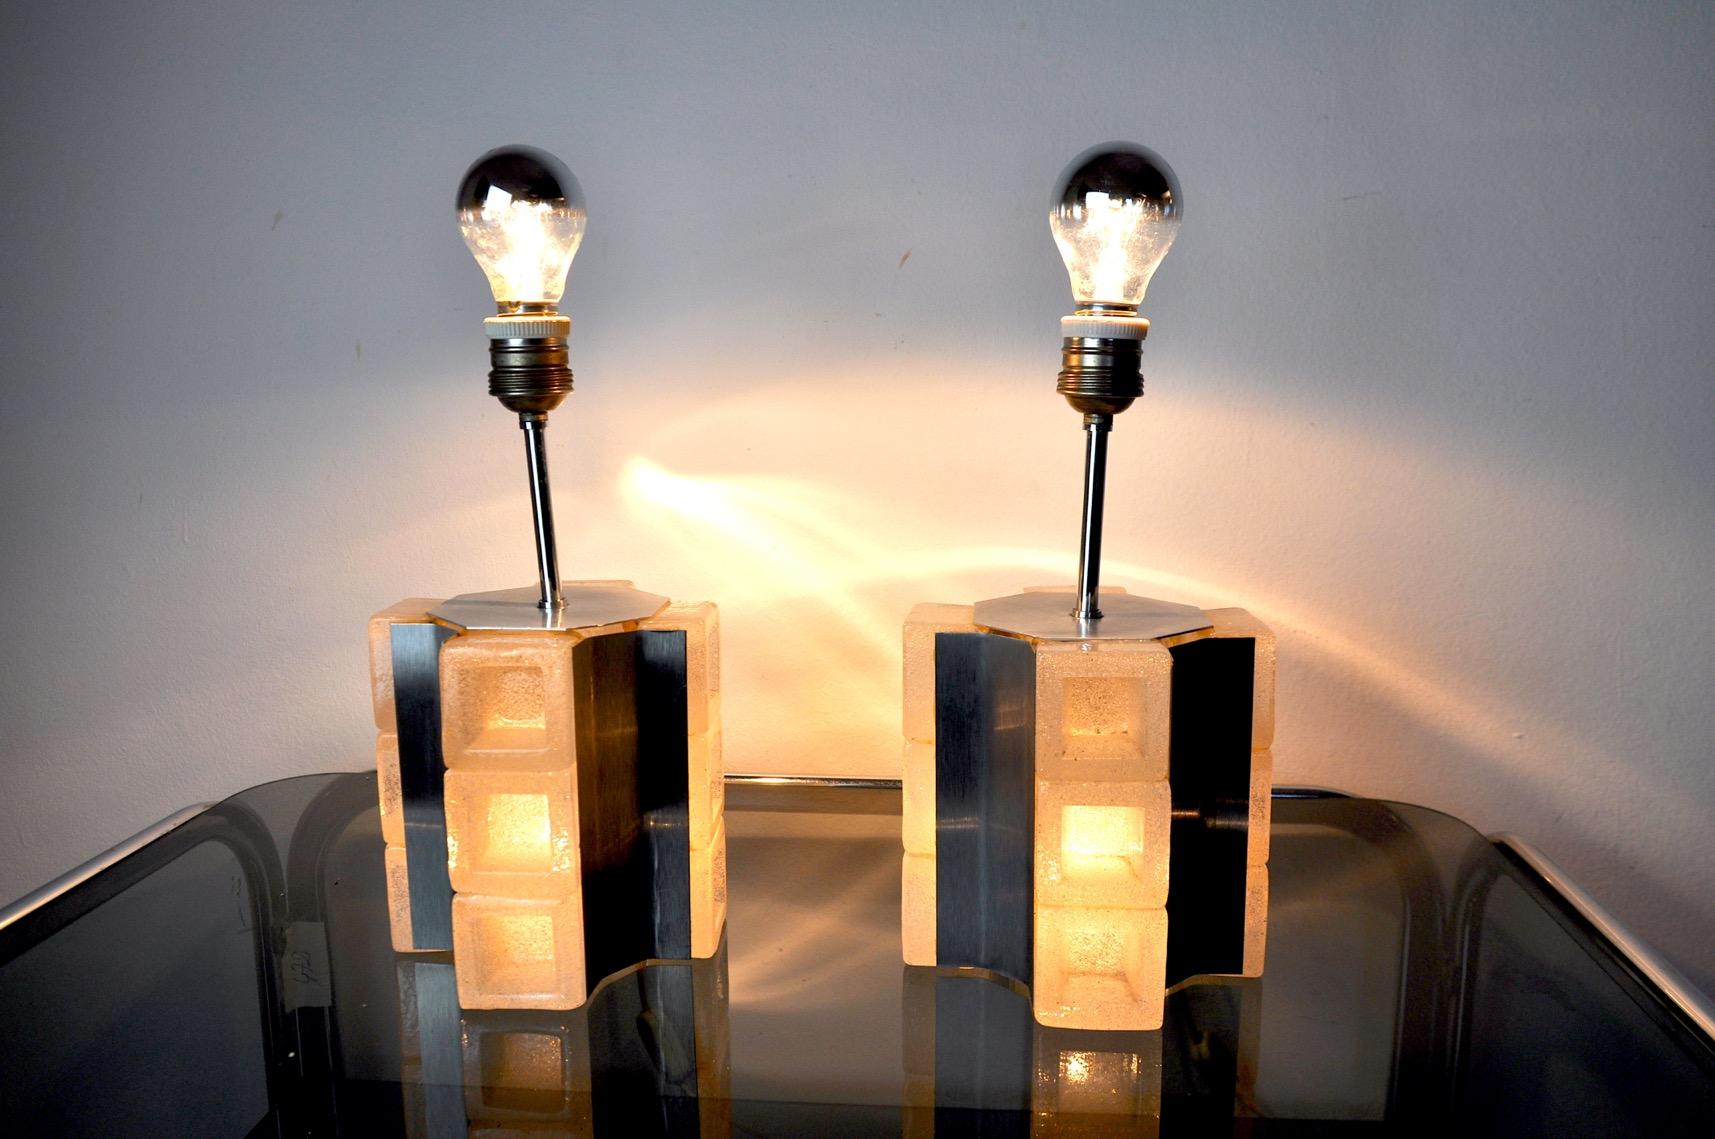 Hollywood Regency Pair of Poliarte Cubic Lamps by Albano Poli, Murano Glass, Italy, 1960 For Sale